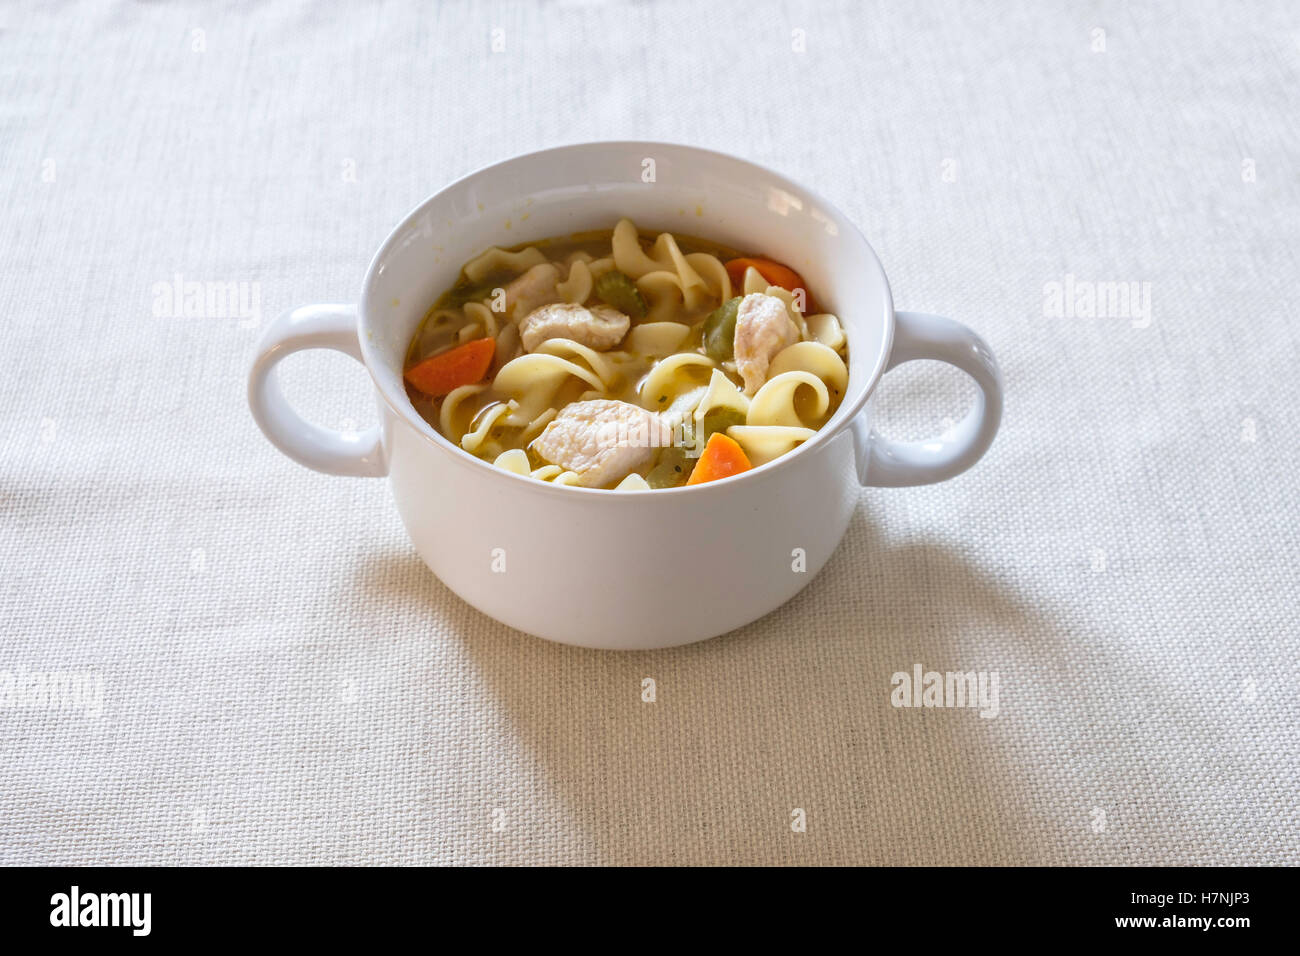 Home made chicken noodle soup, comfort food, containing carrots and celery served in a white bowl. Stock Photo